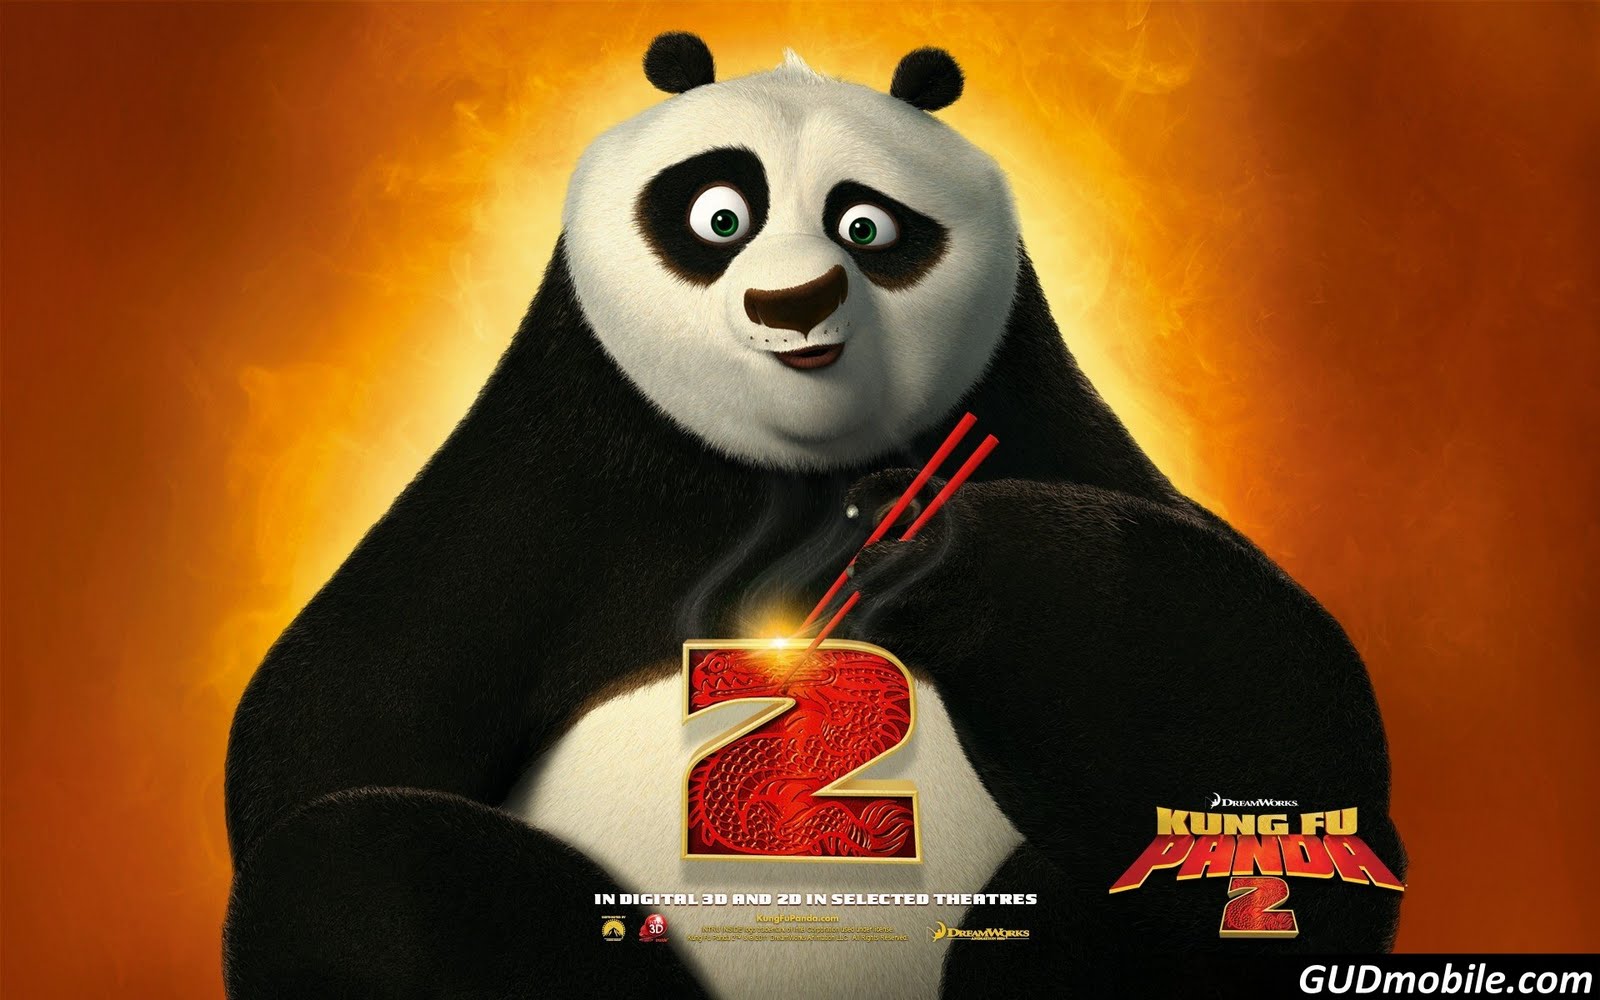 Panda HD Poster Entertainment Wallpapeprs Pictures And Songs